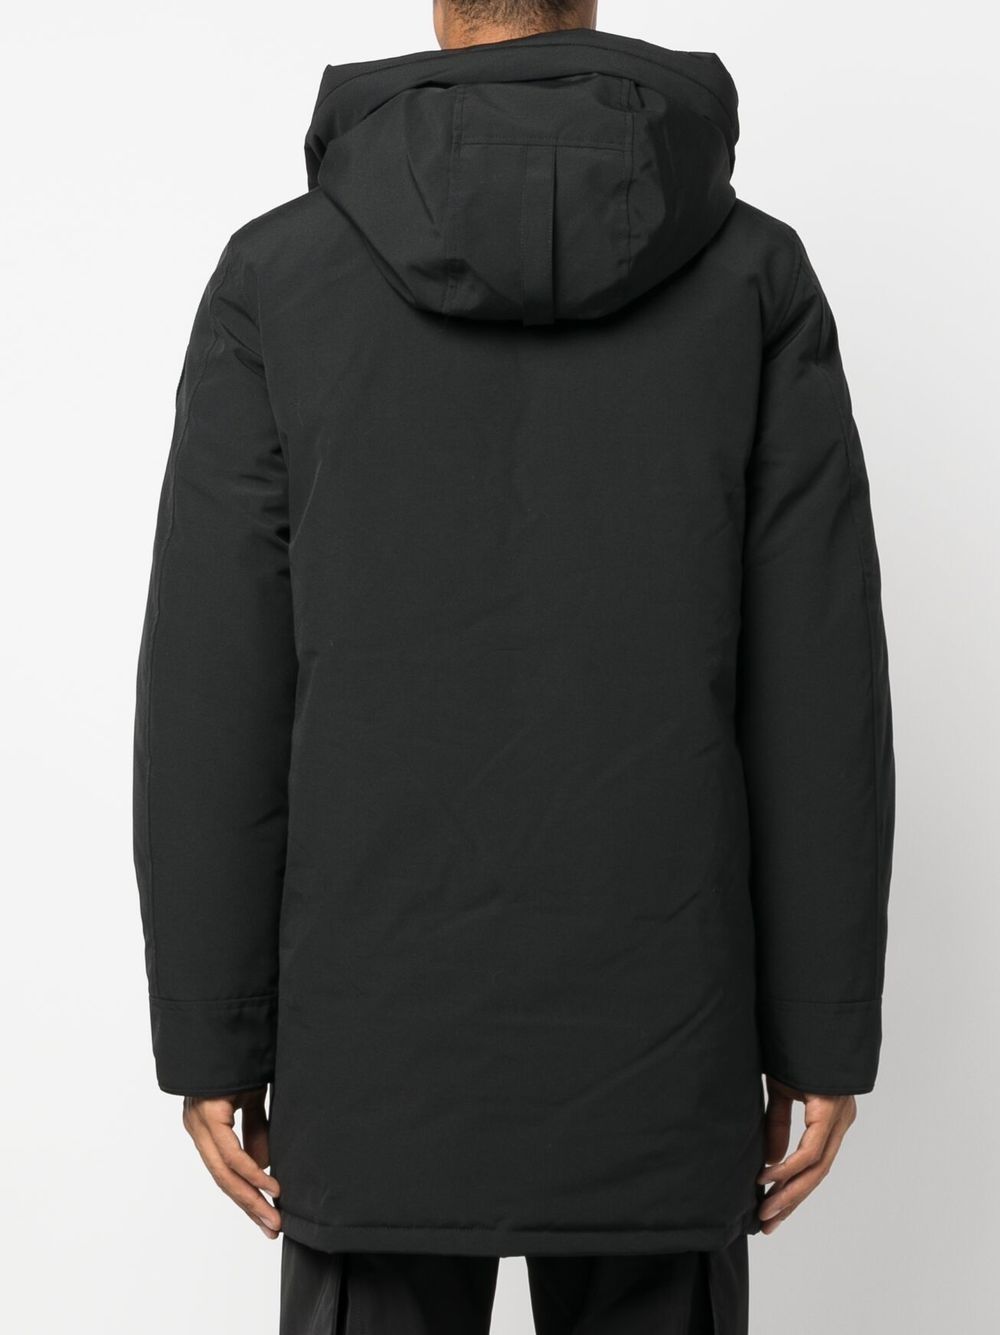 Canada Goose Langford Hooded Down Coat - Farfetch